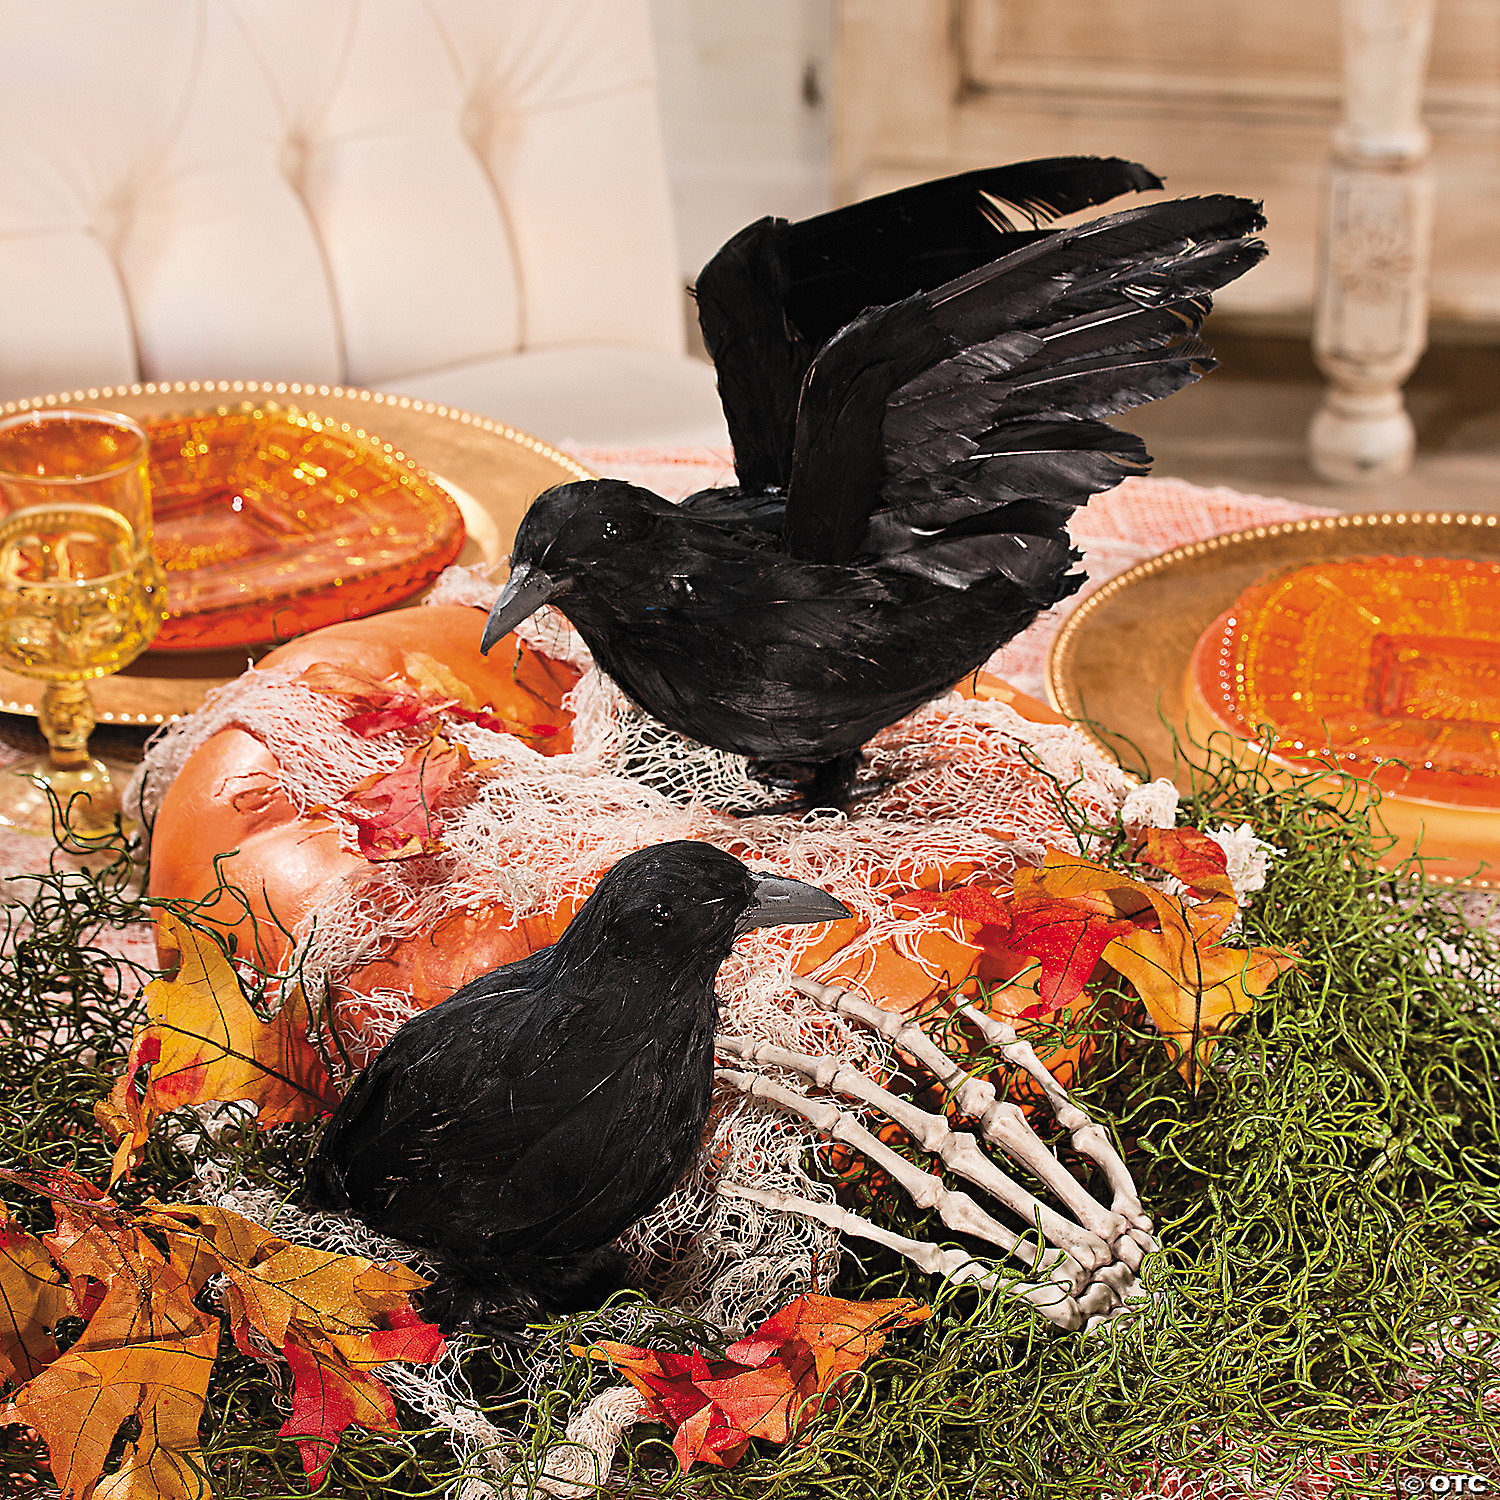 Halloween Crows And Ravens Decor Realistic Handmade Decorations Fake Crows Ravens Prop 3 Pack Black Crows Halloween Decor Feathered Crow Fly And Stand Ravens for Outdoors And Indoors Crow Decoration 